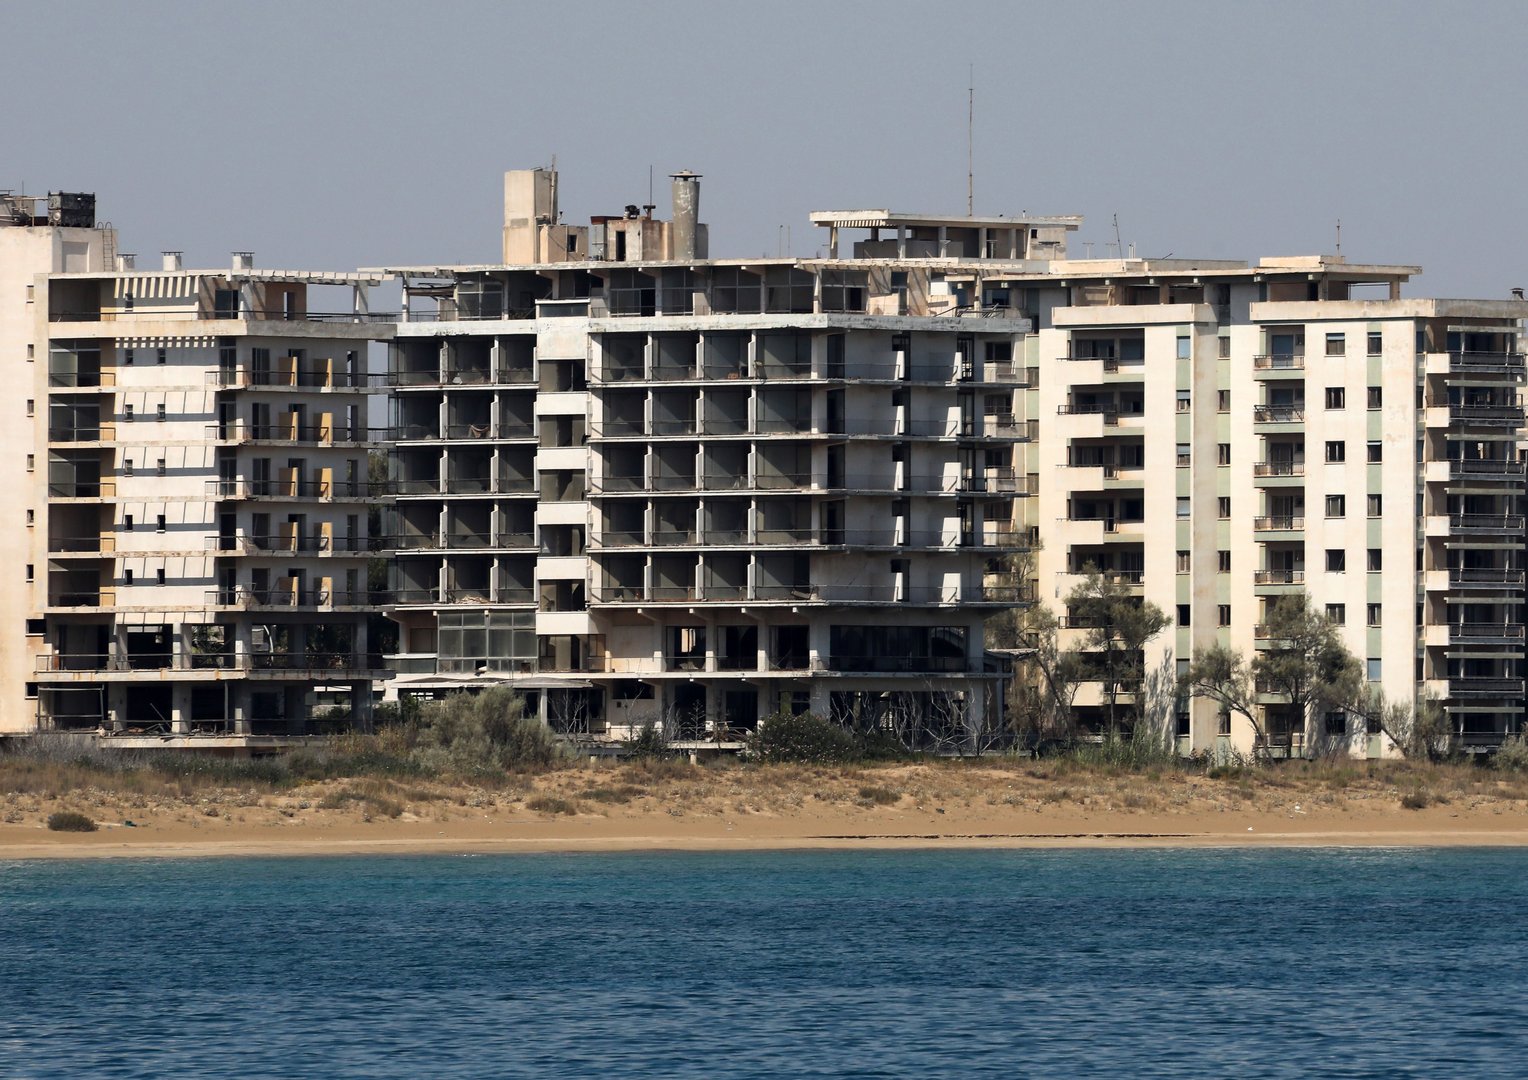 image No sales transaction for hotels in Varosha, IPC chair says